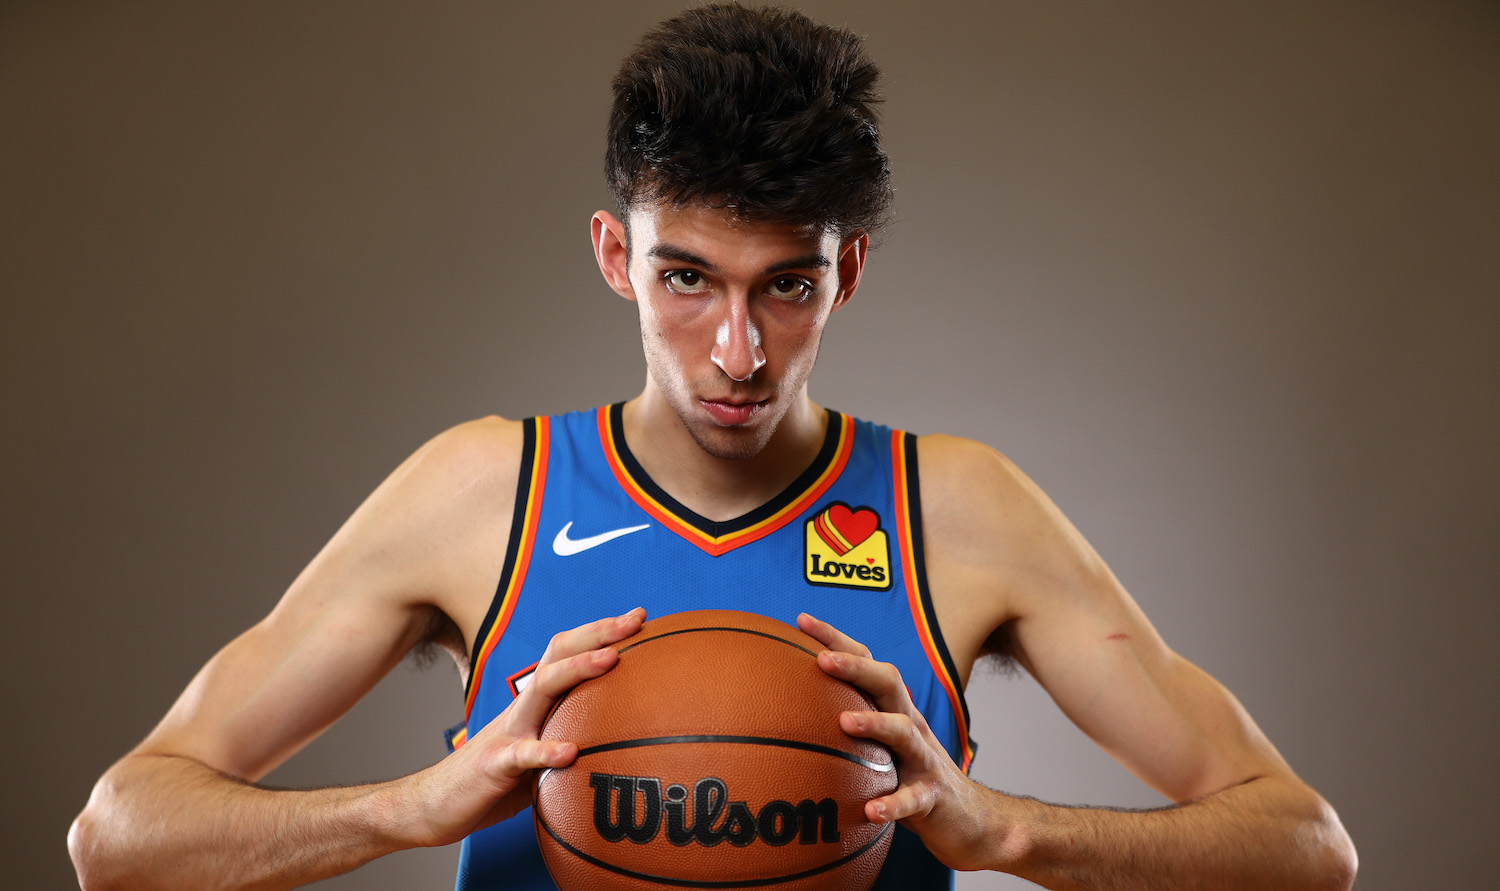 LAS VEGAS, NEVADA - JULY 14: Chet Holmgren #7 of the Oklahoma City Thunder poses during the 2022 NBA Rookie Portraits at UNLV on July 14, 2022 in Las Vegas, Nevada. NOTE TO USER: User expressly acknowledges and agrees that, by downloading and/or using this photograph, User is consenting to the terms and conditions of the Getty Images License Agreement. (Photo by Gregory Shamus/Getty Images)